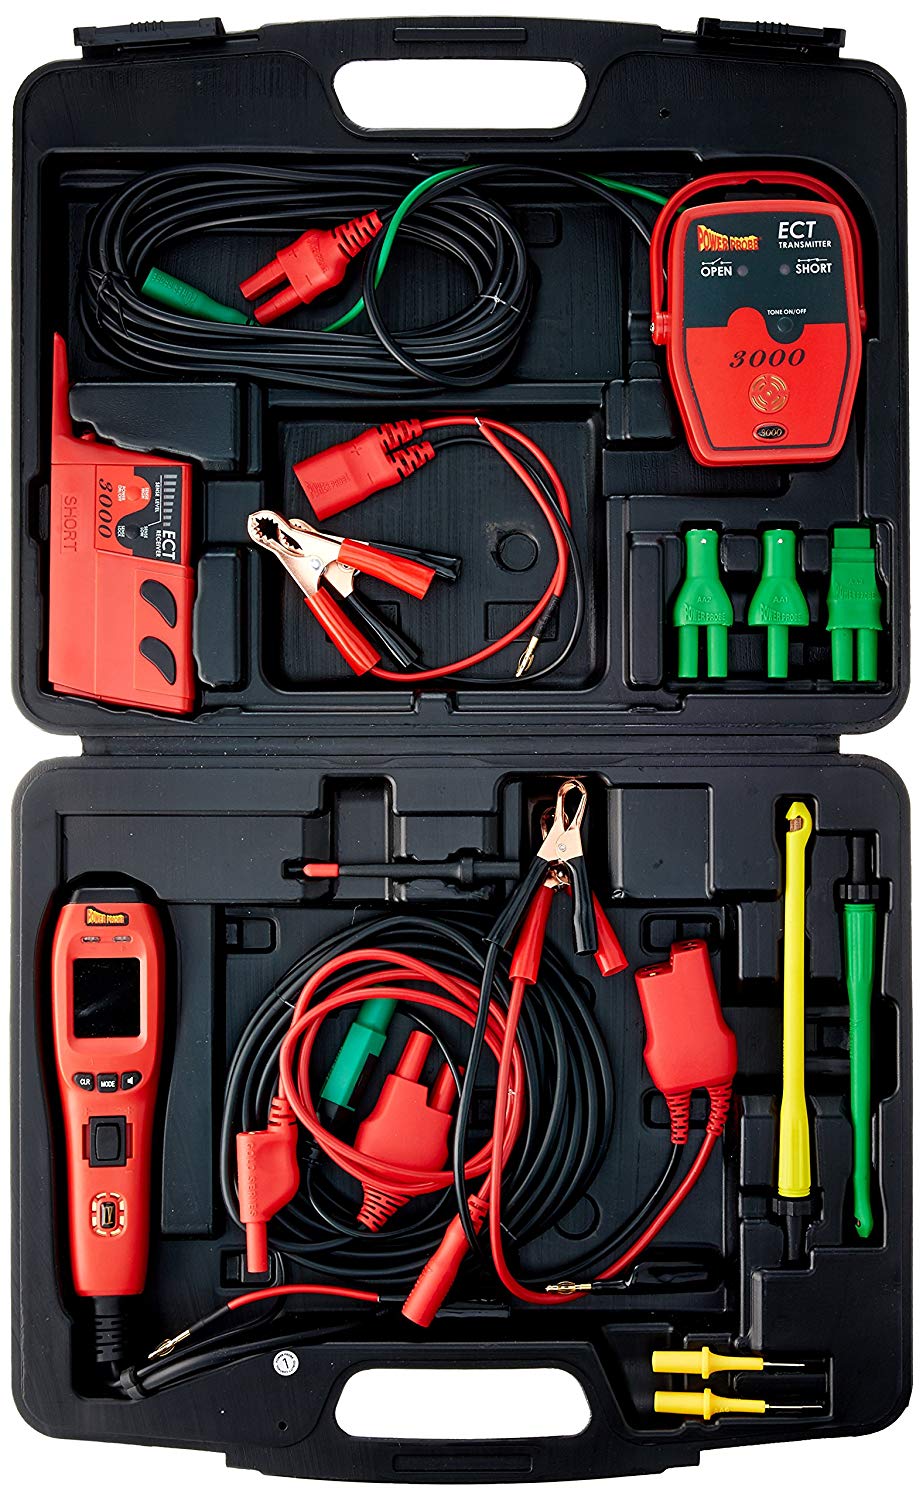 POWER PROBE IV Master Combo Kit - Red (PPKIT04) Includes Power Probe IV with PPECT3000 and Accessories - MPR Tools & Equipment